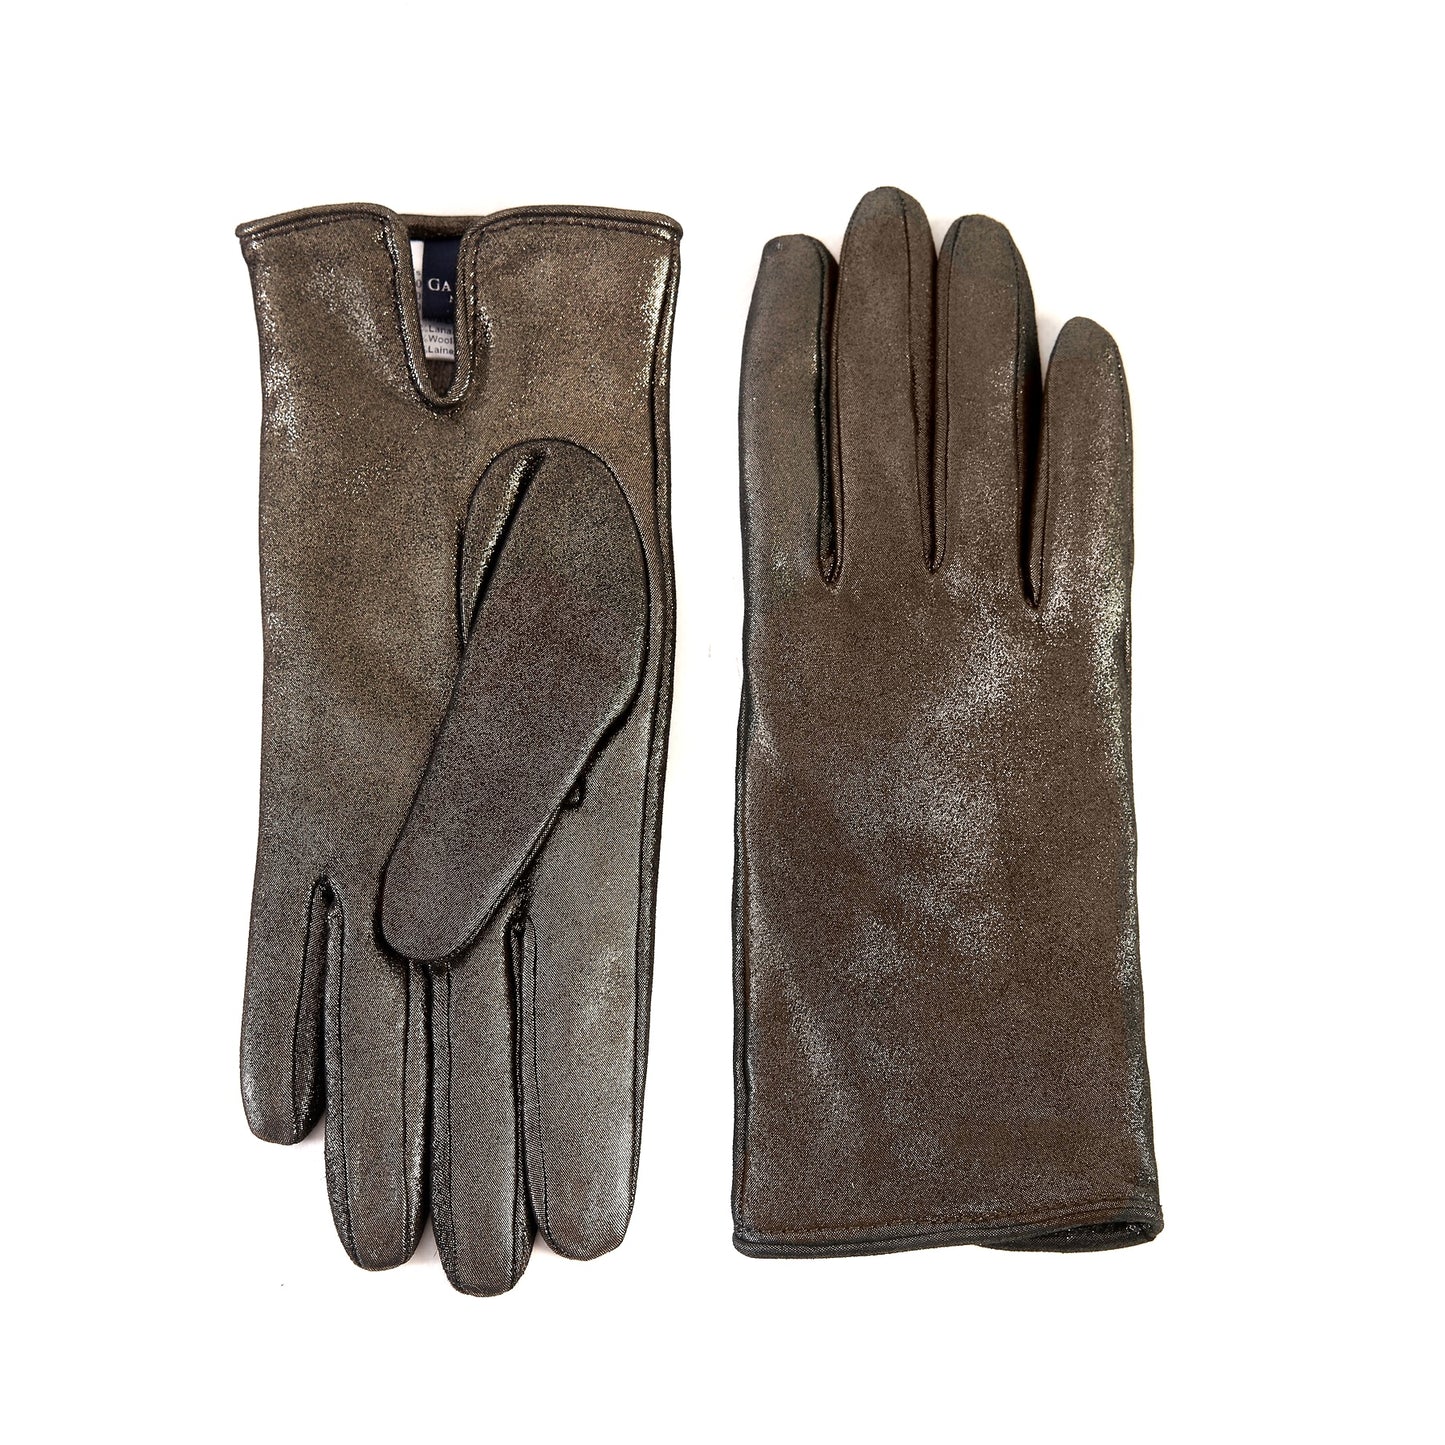 Women’s basic gold soft laminated suede leather gloves with palm opening and mix cashmere lining